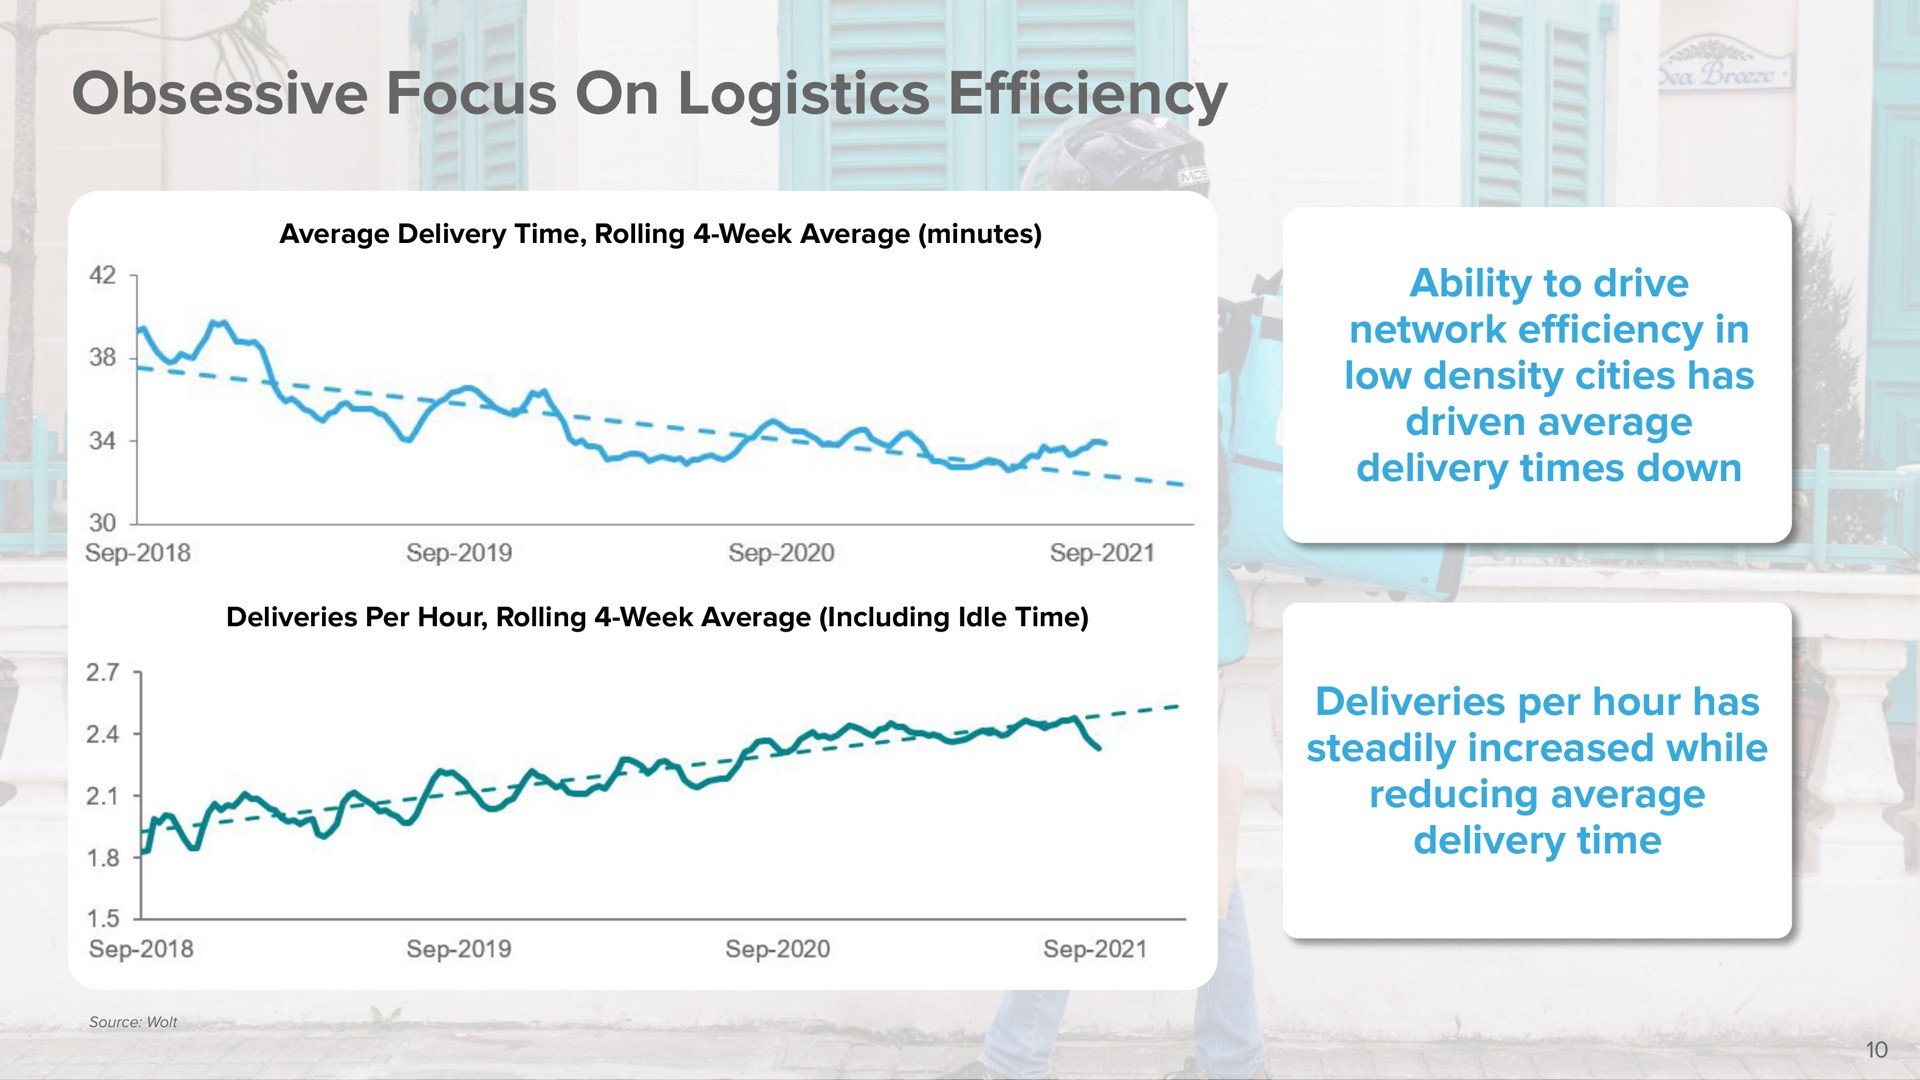 projects divinities presentations investor presentation warsaw investor presentation obsessive focus on logistics average delivery time rolling week average minutes deliveries per hour rolling week average including idle time ability to drive network in low density cities has driven average delivery times down deliveries per hour has steadily increased while reducing average delivery time efficiency | DoorDash